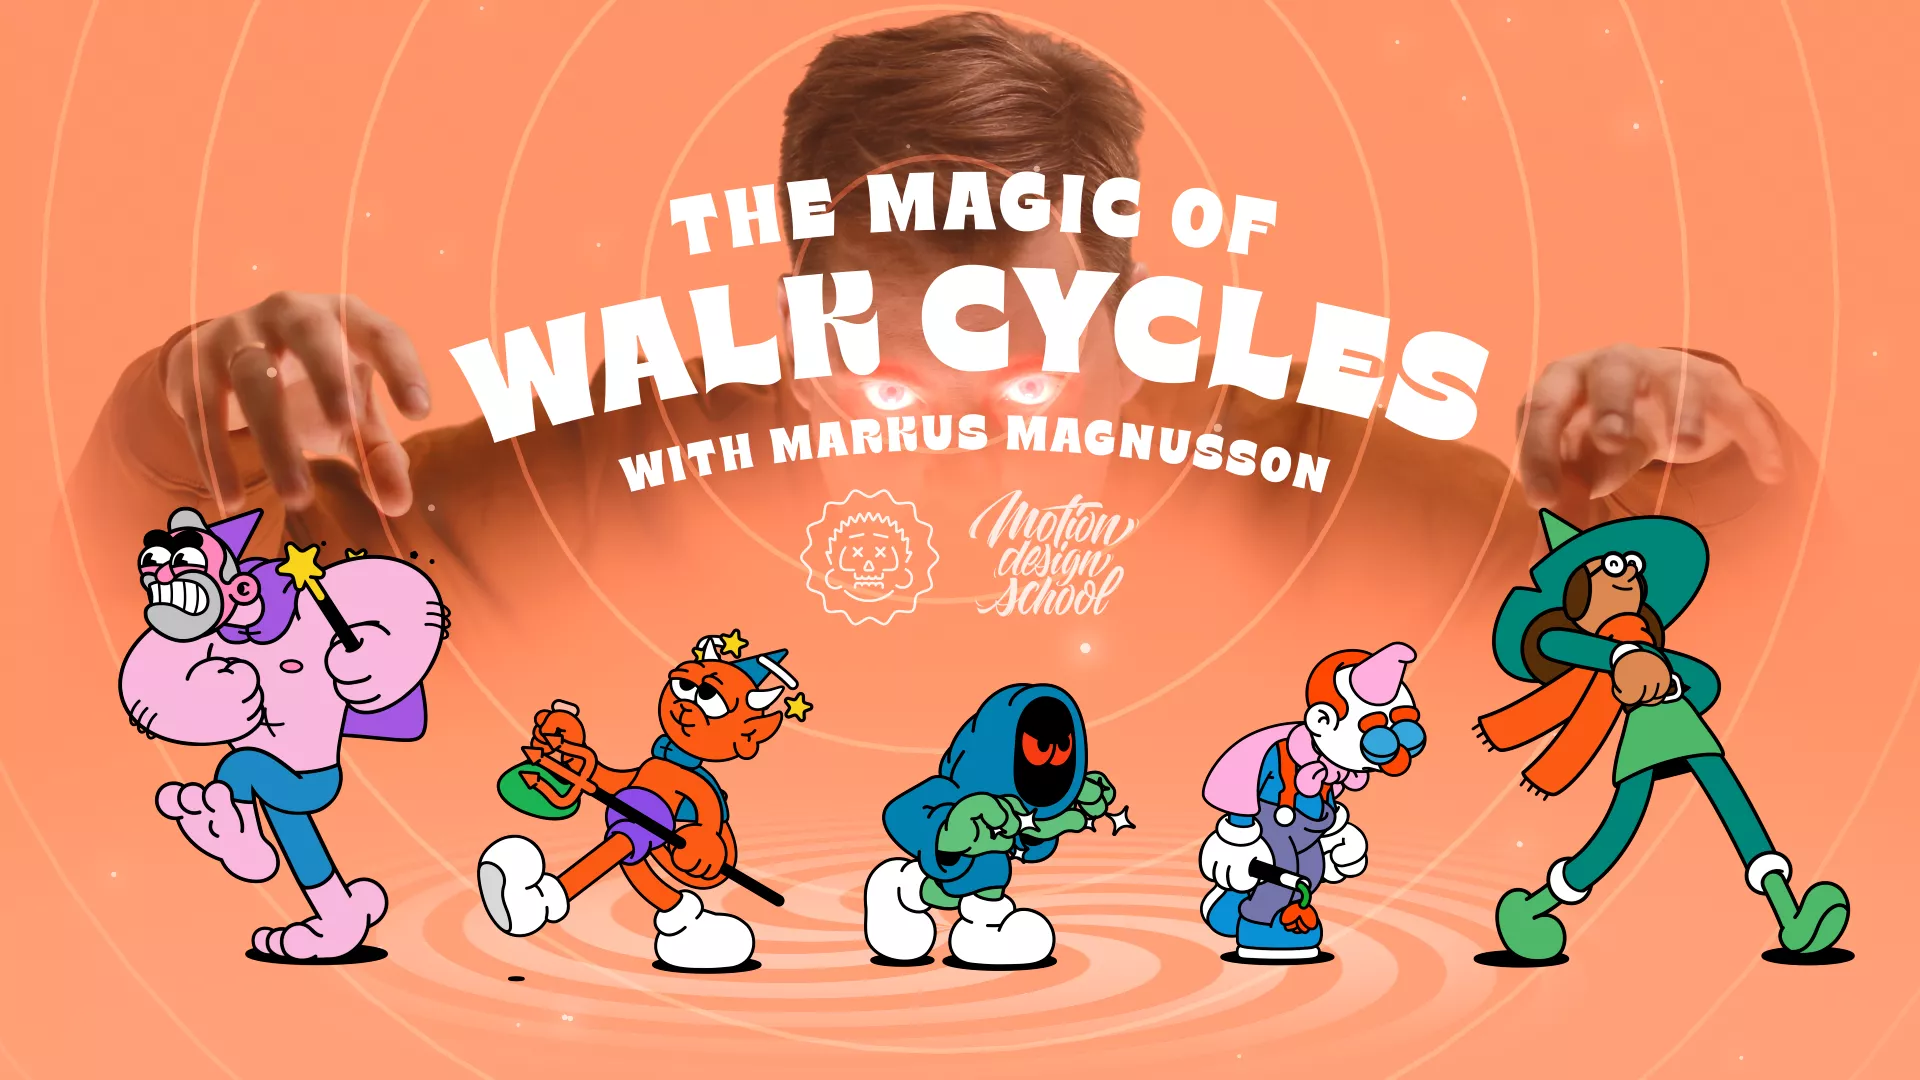 Motion Design School – The Magic of Walk Cycles free download